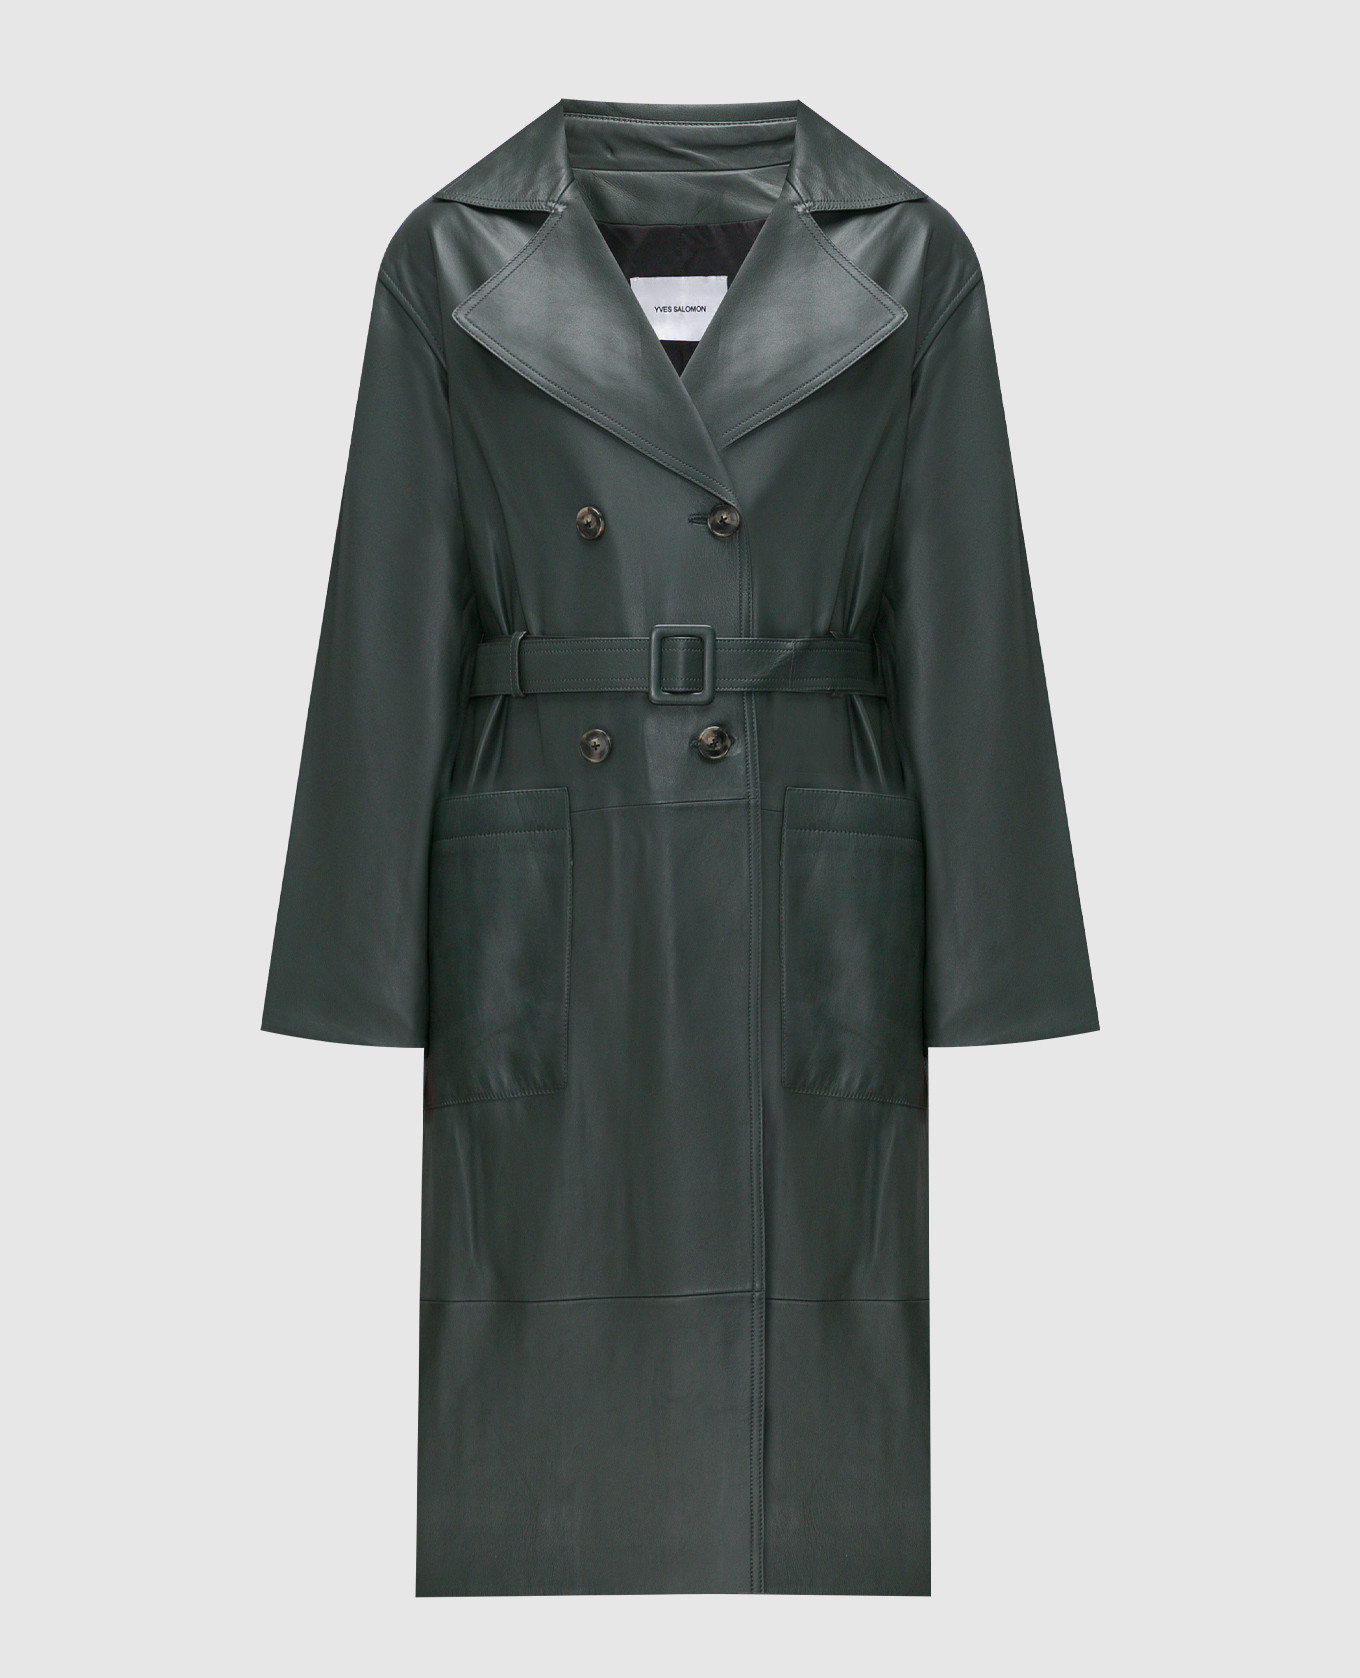 Green double-breasted leather trench coat